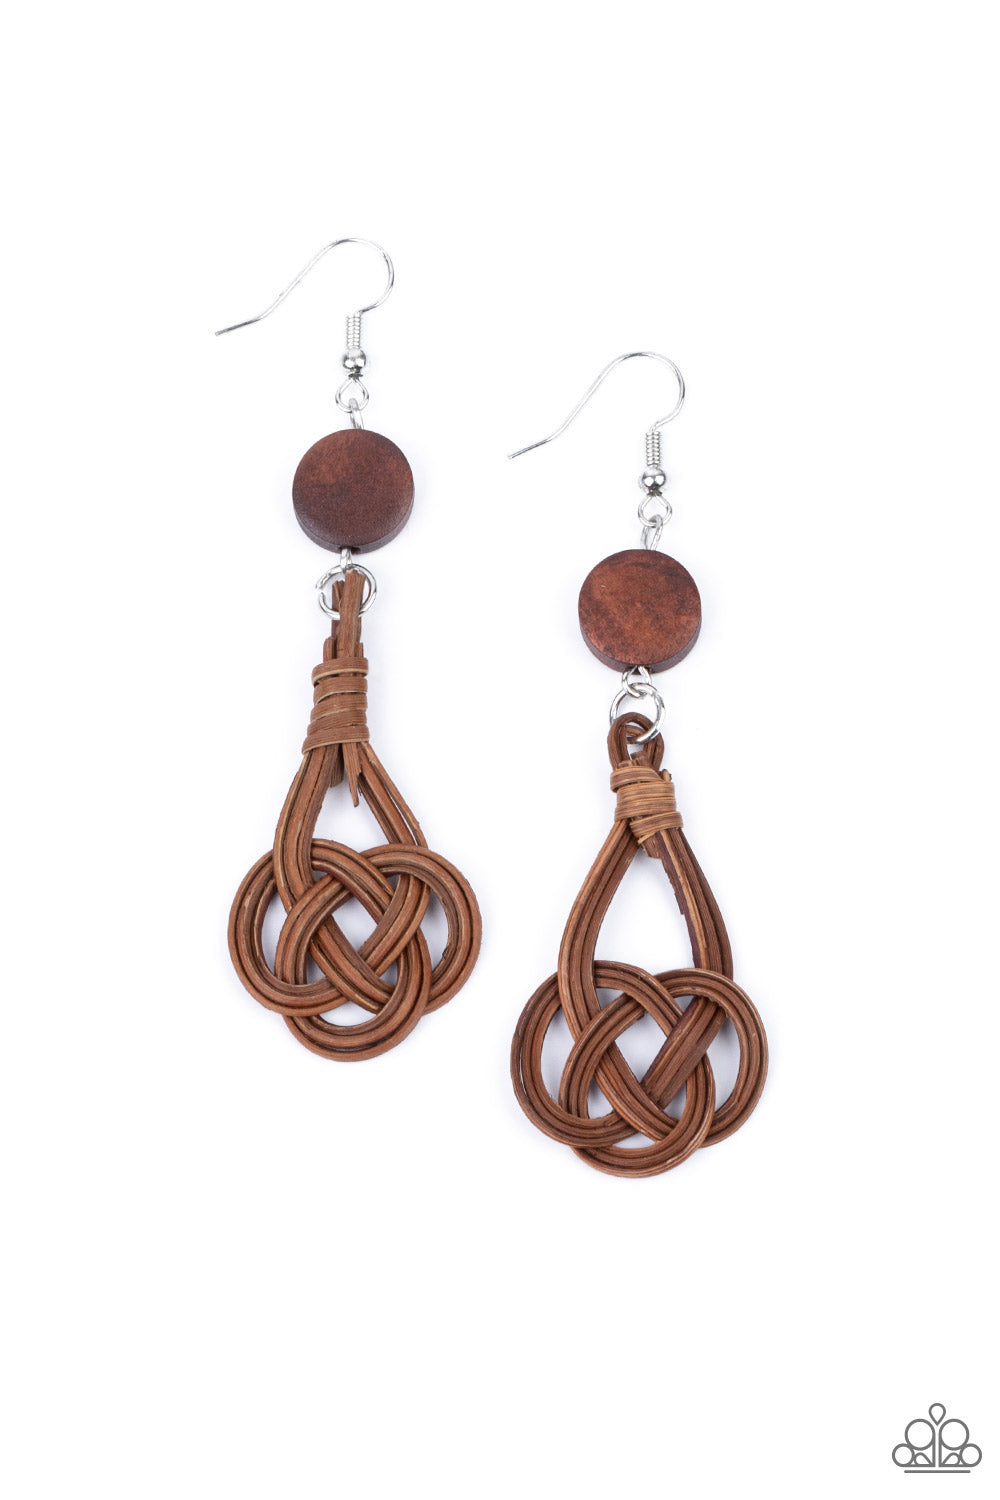 Brown wicker-like laces delicately twist into a knotted frame that attaches to a dainty brown wooden disc